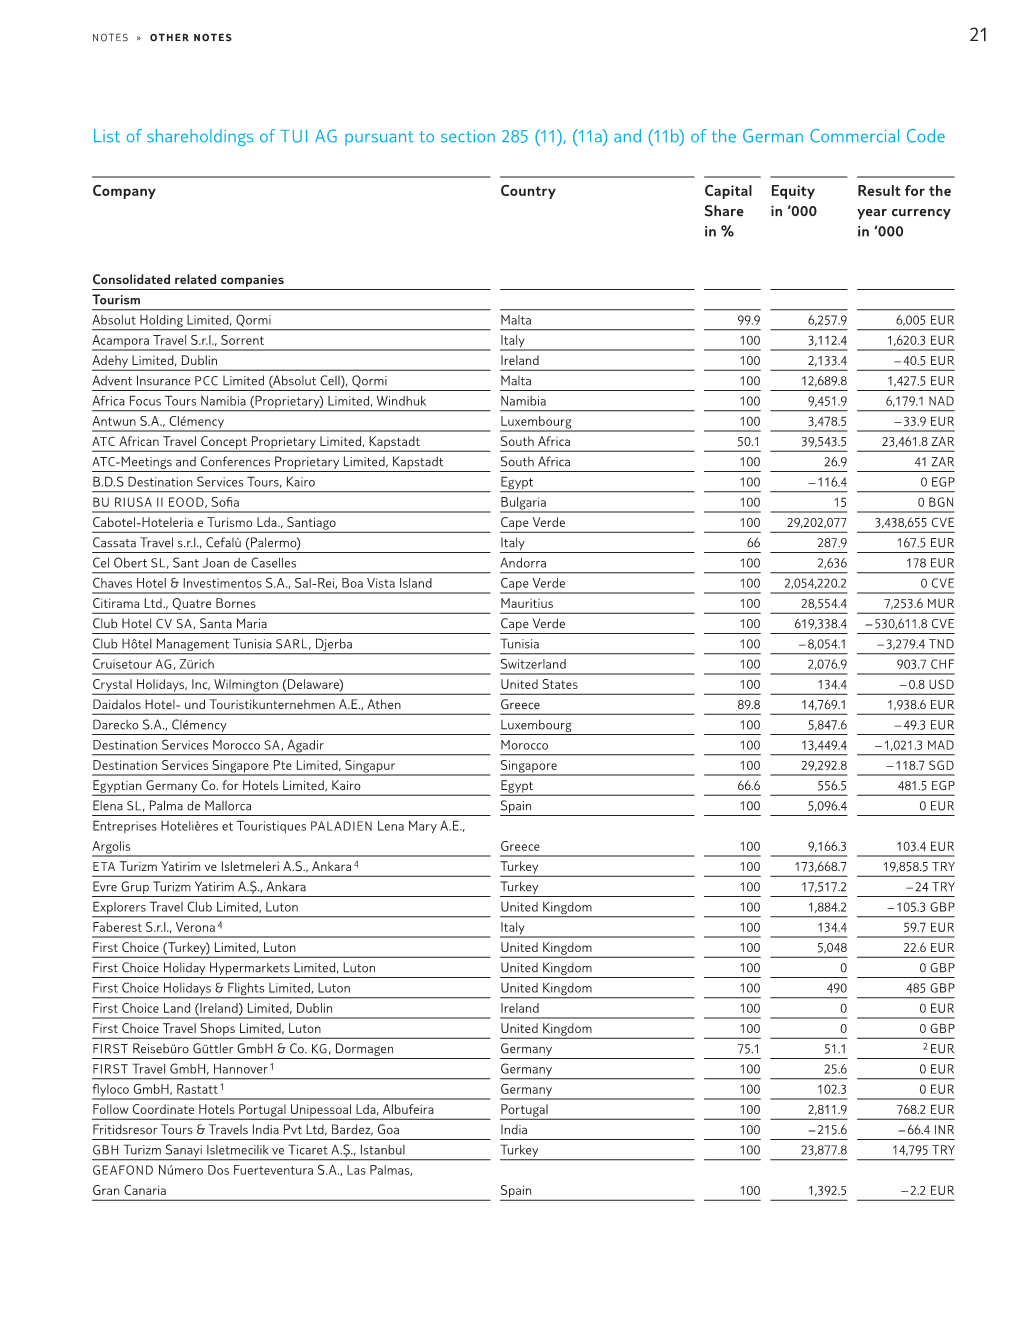 List of Shareholdings of TUI AG Pursuant to Section 285 (11), (11A) and (11B) of the German Commercial Code